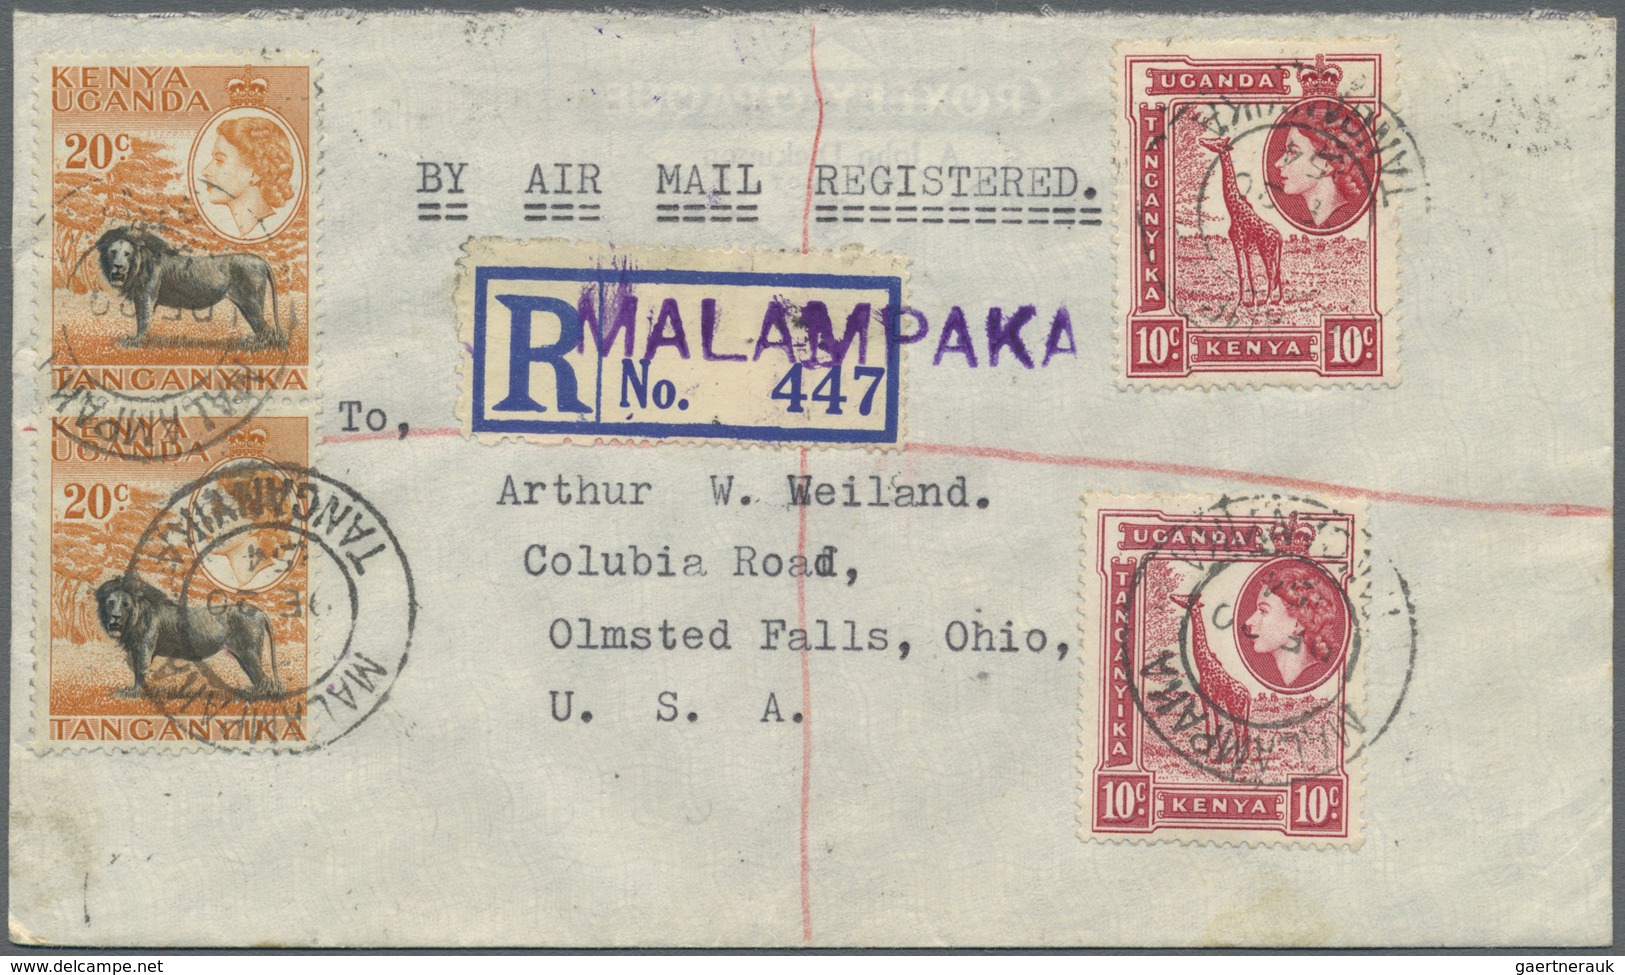 Br Britisch-Ostafrika und Uganda: 1911/1958: Valuable lot of 43 covers, postal stationeries and picture